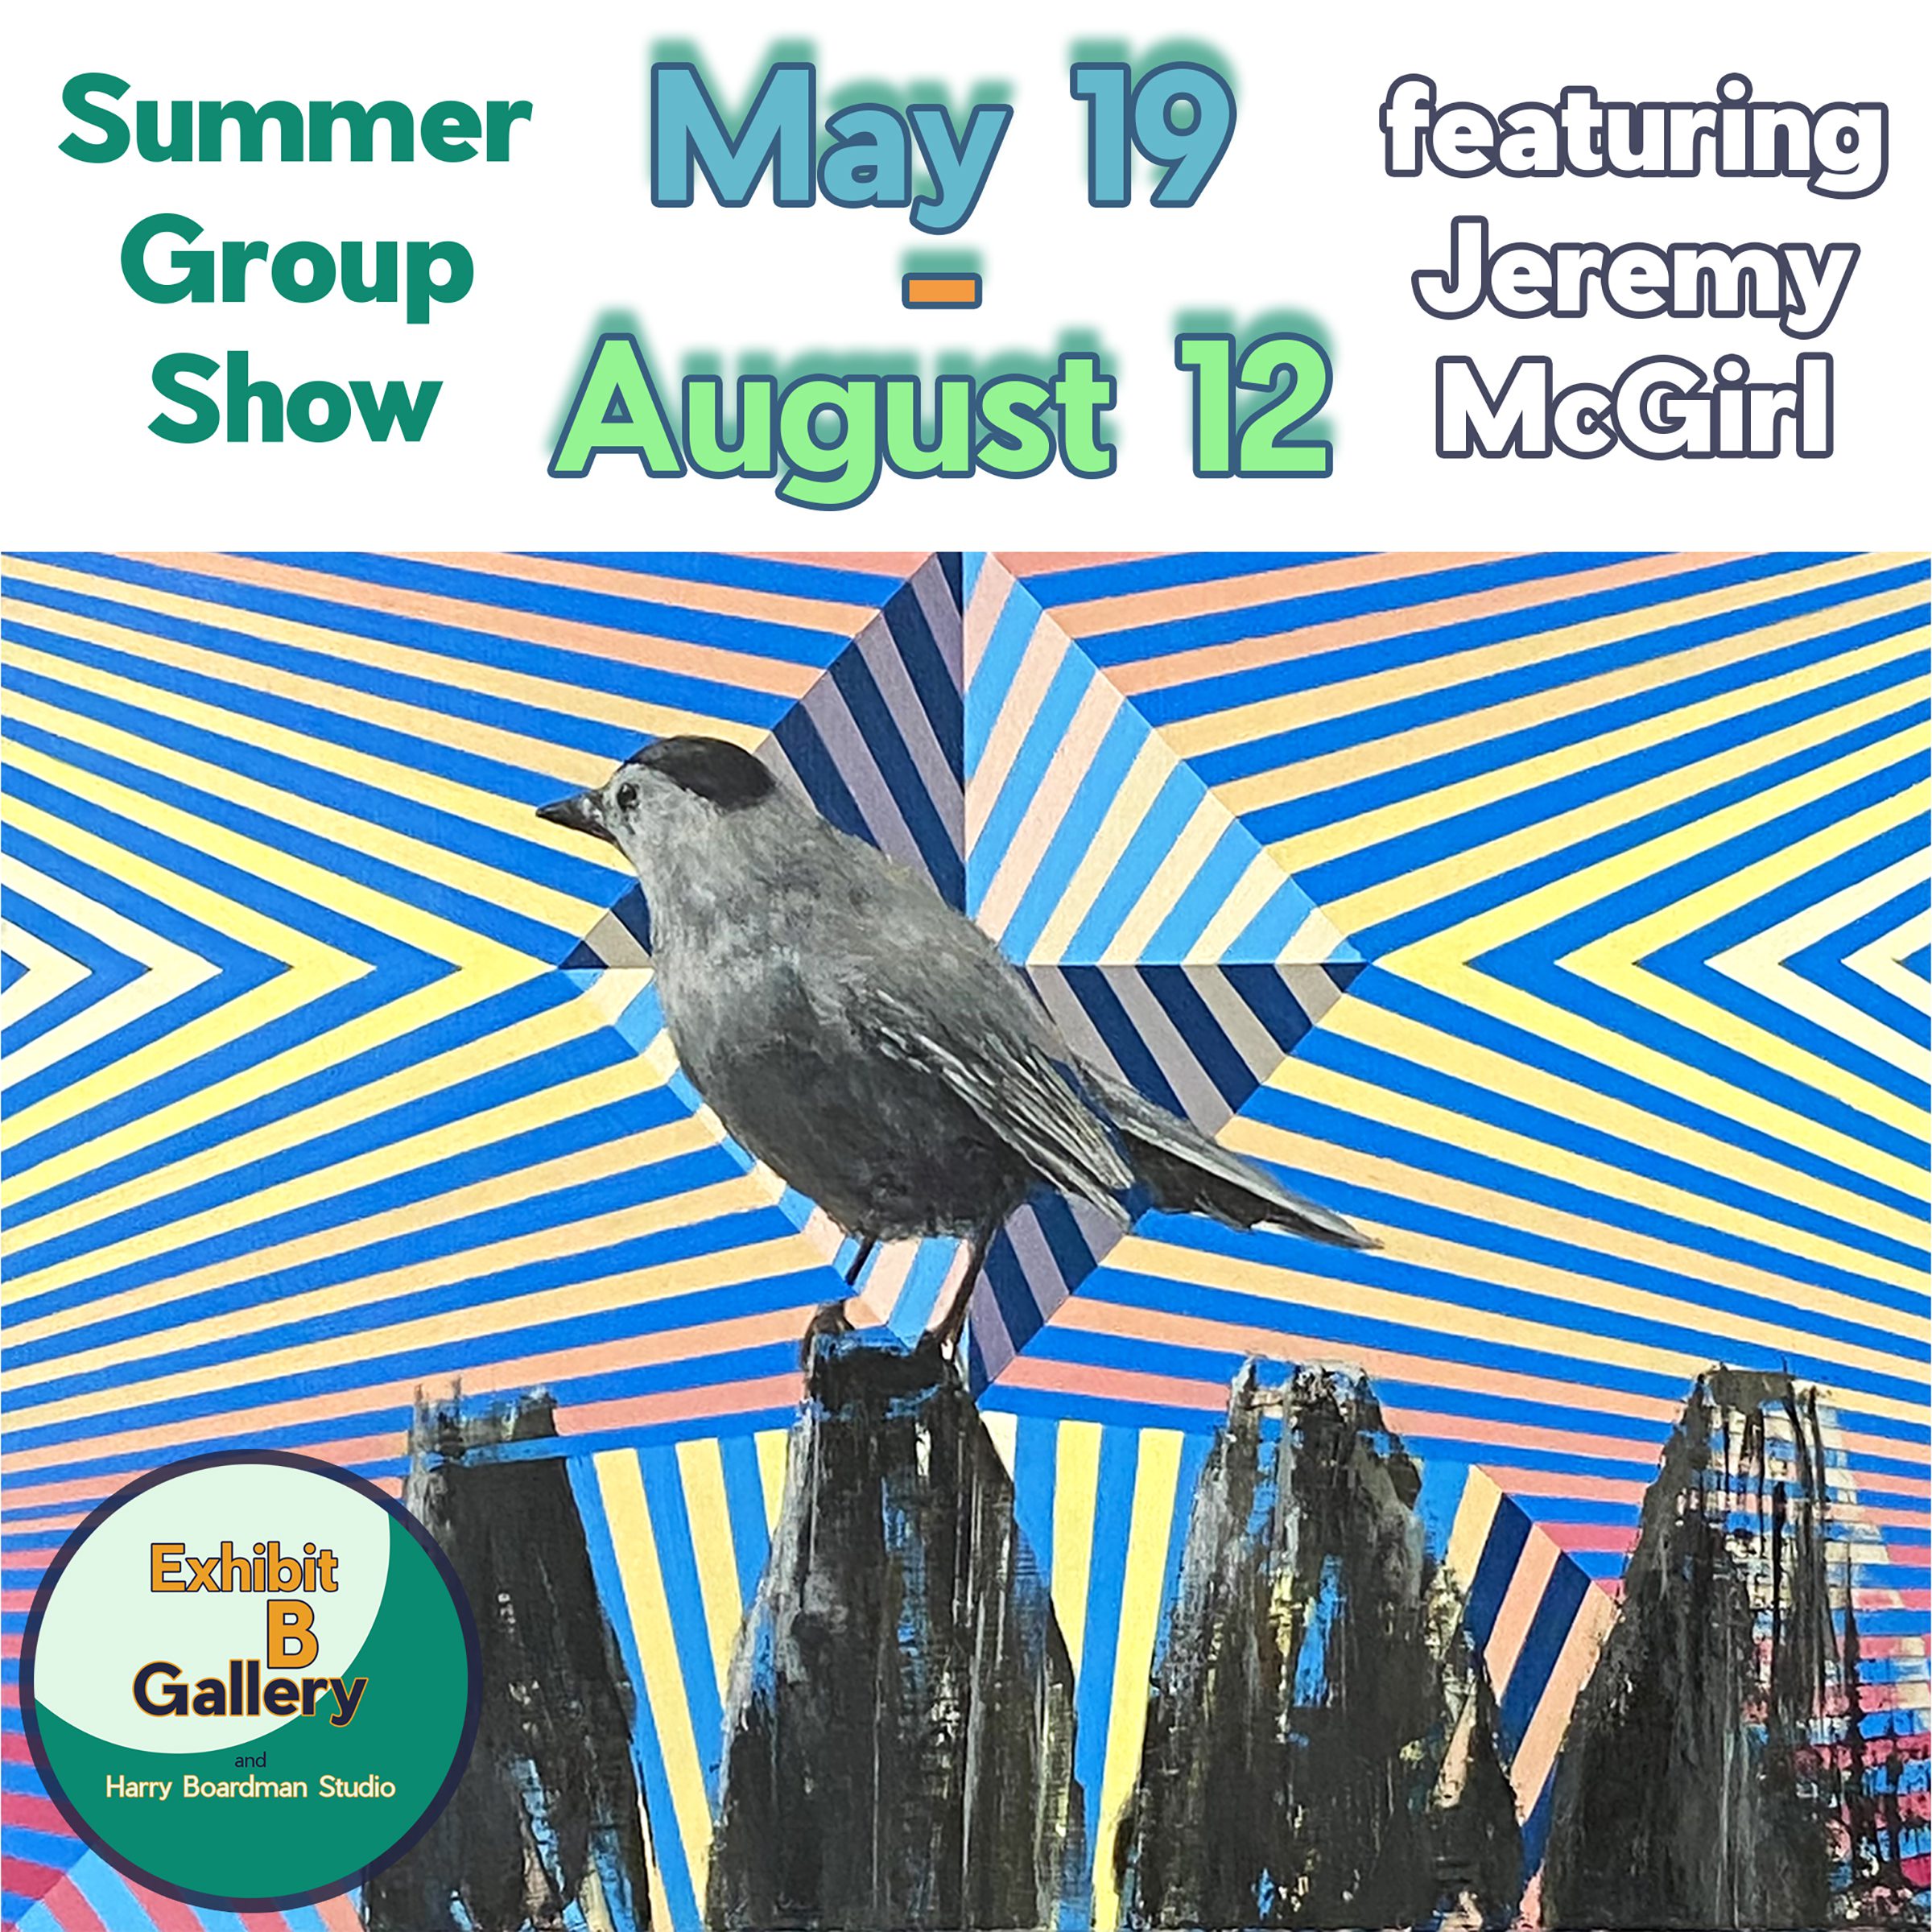 Summer Art Show at Exhibit B Gallery in Souderton featuring Jeremy McGirl